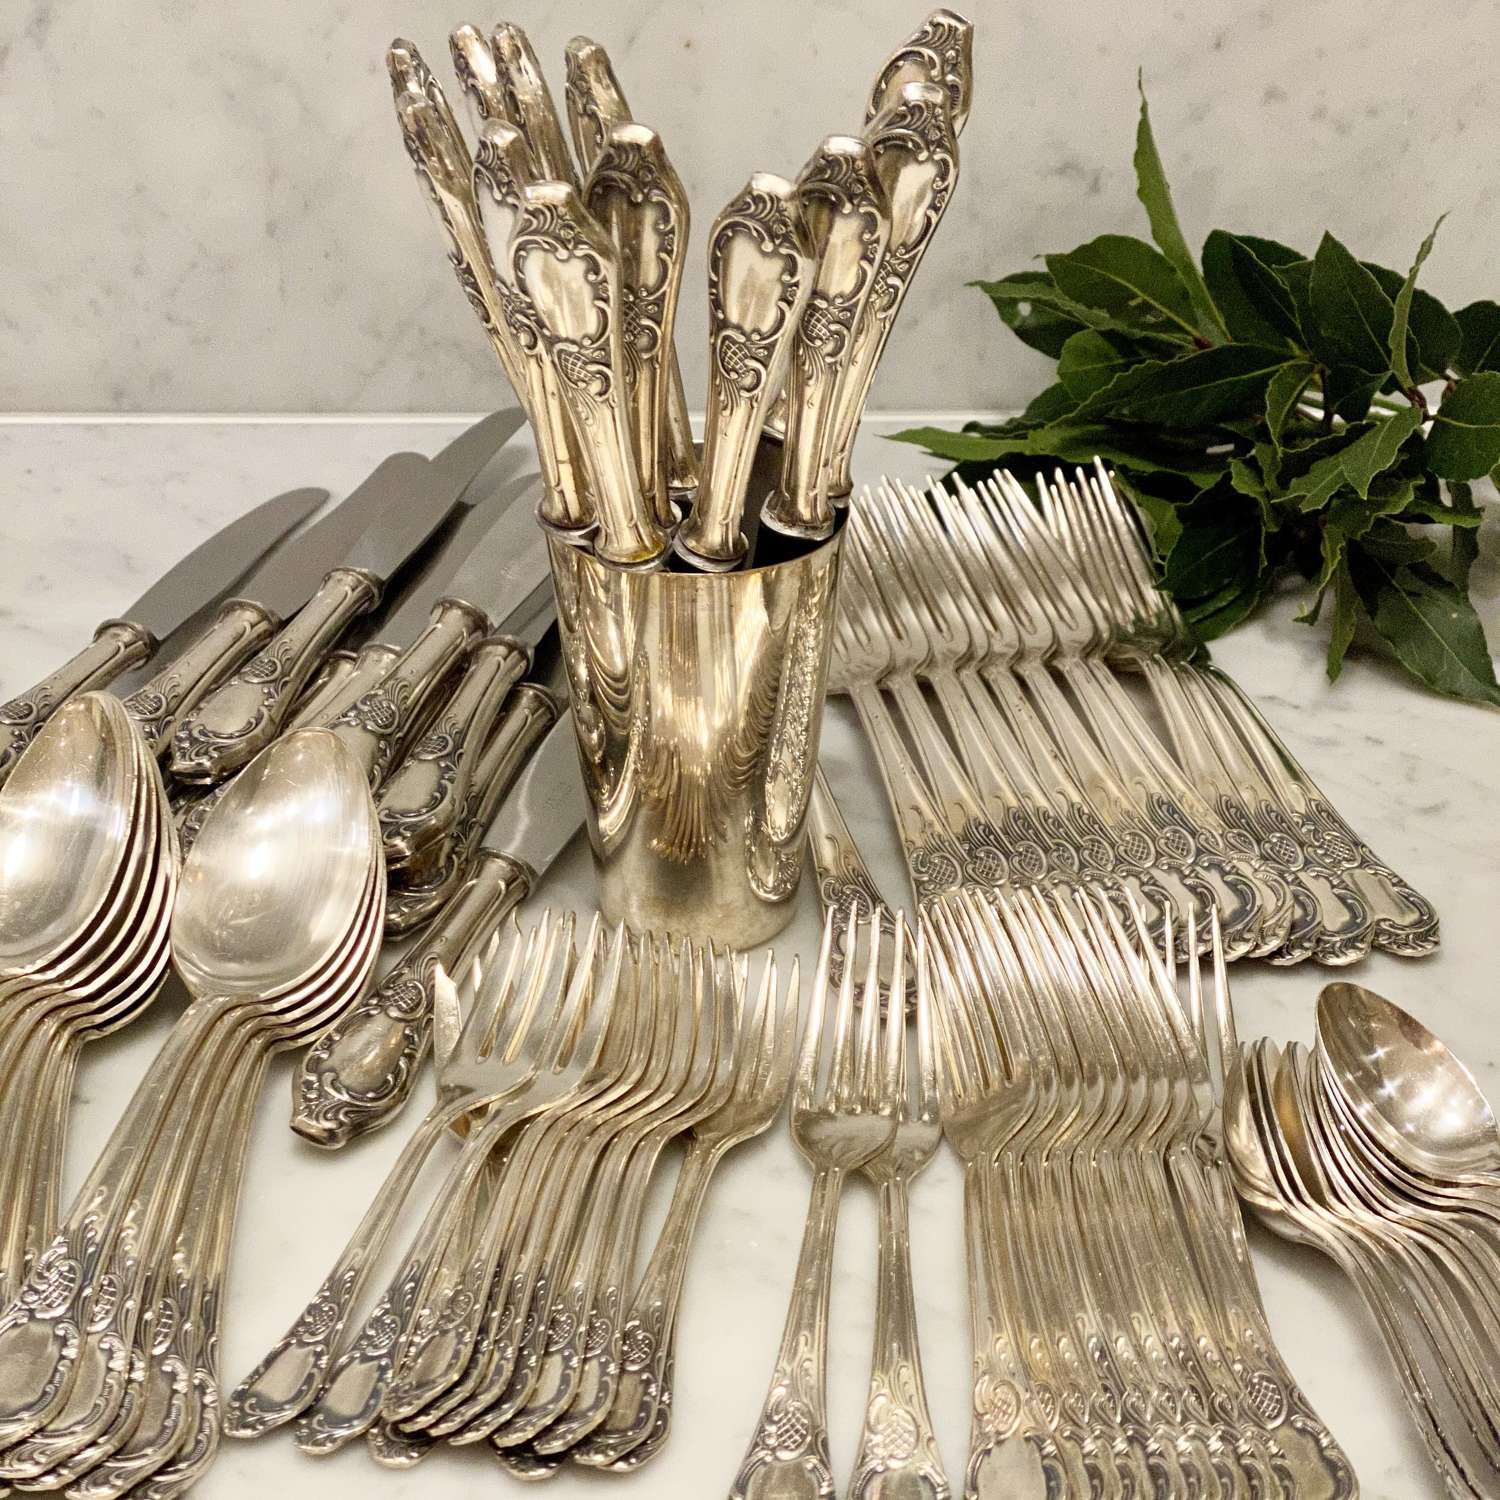 Full set of Art Deco silver plated cutlery for 12 people